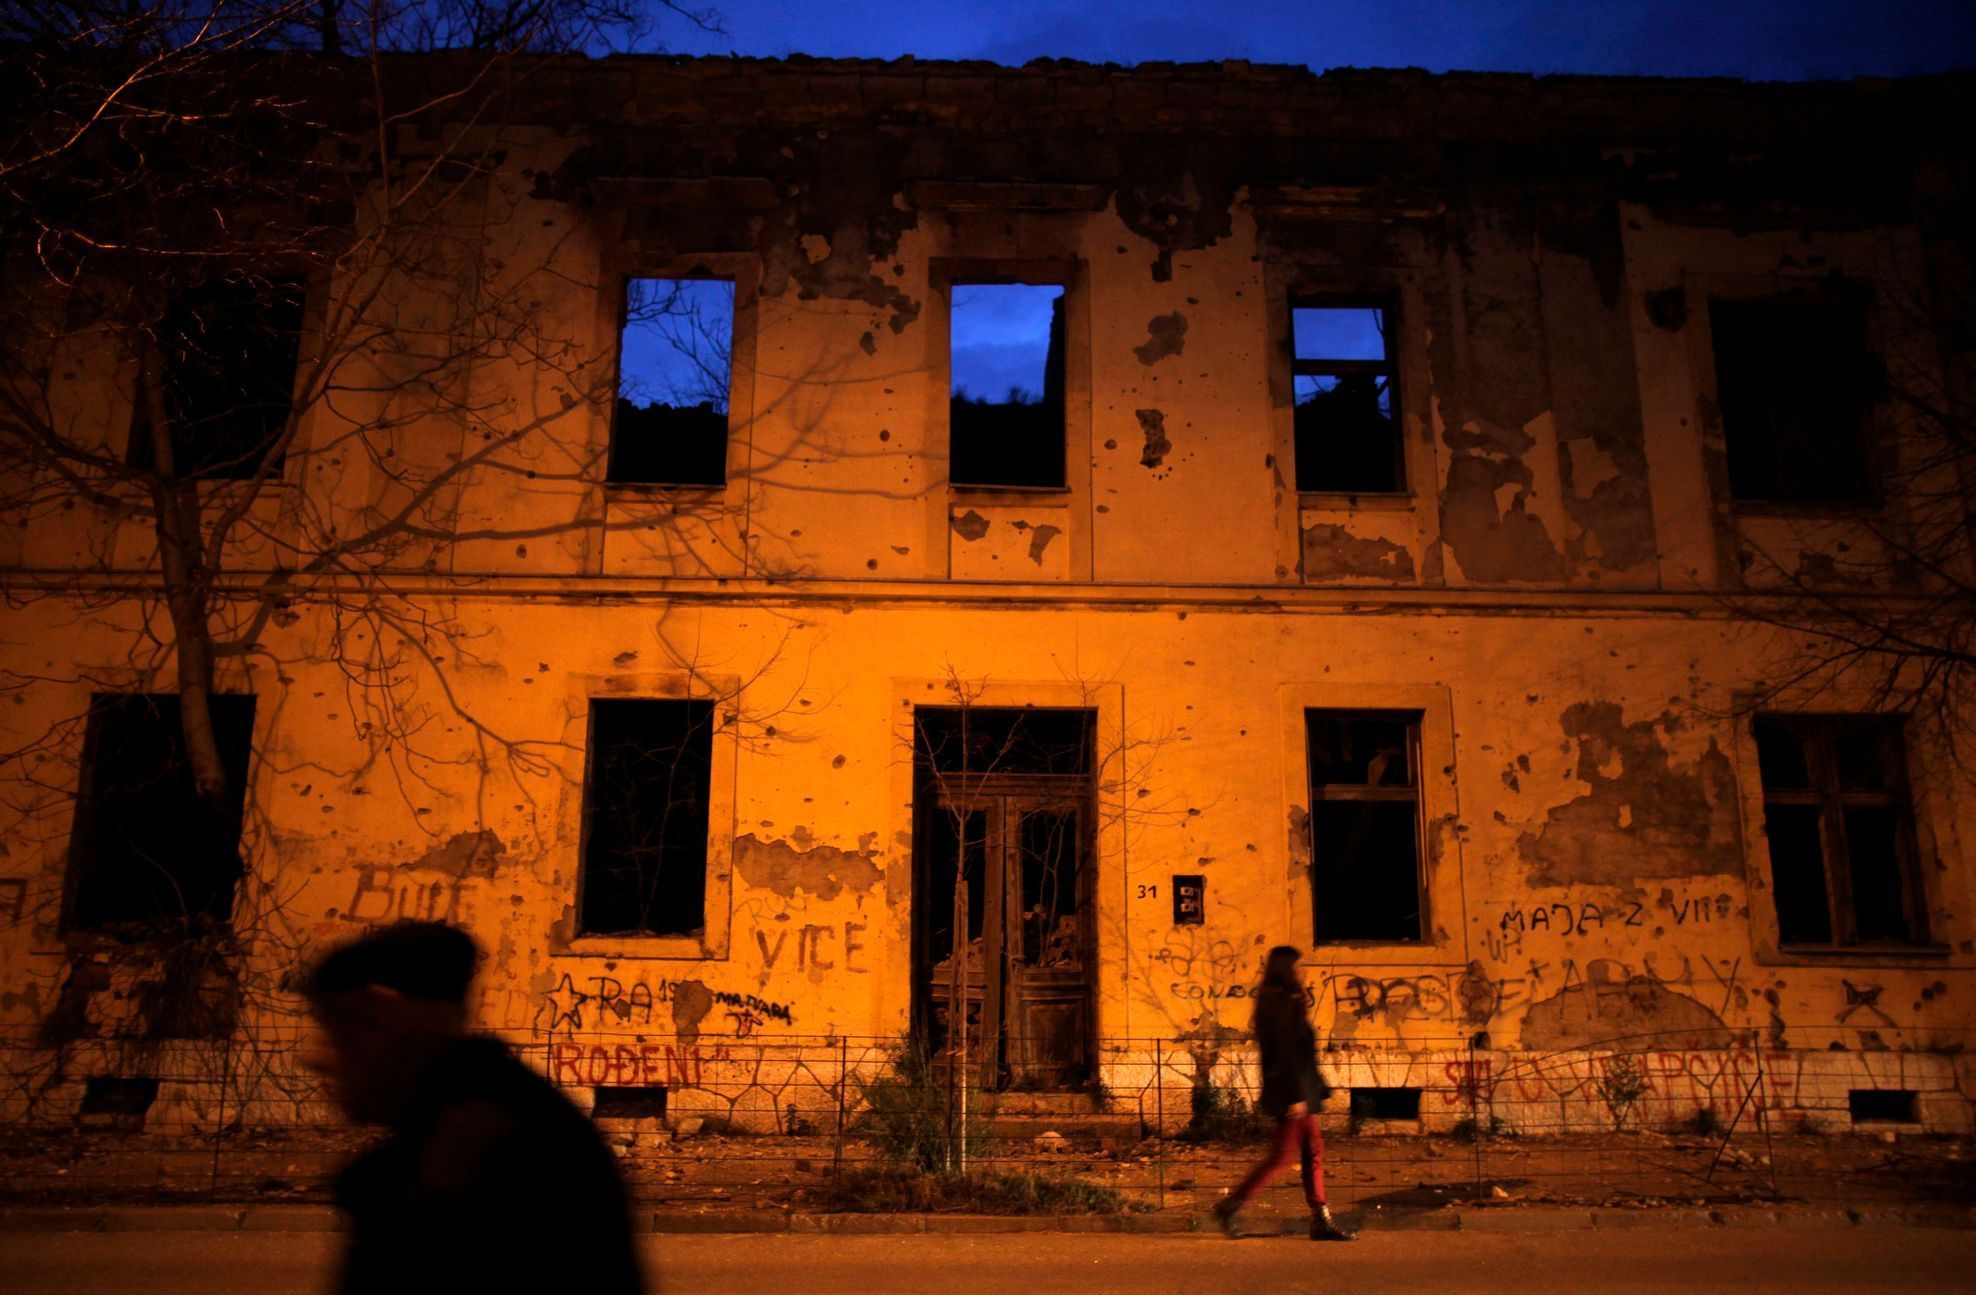 File photo of people walking next to a destroyed building in Mostar